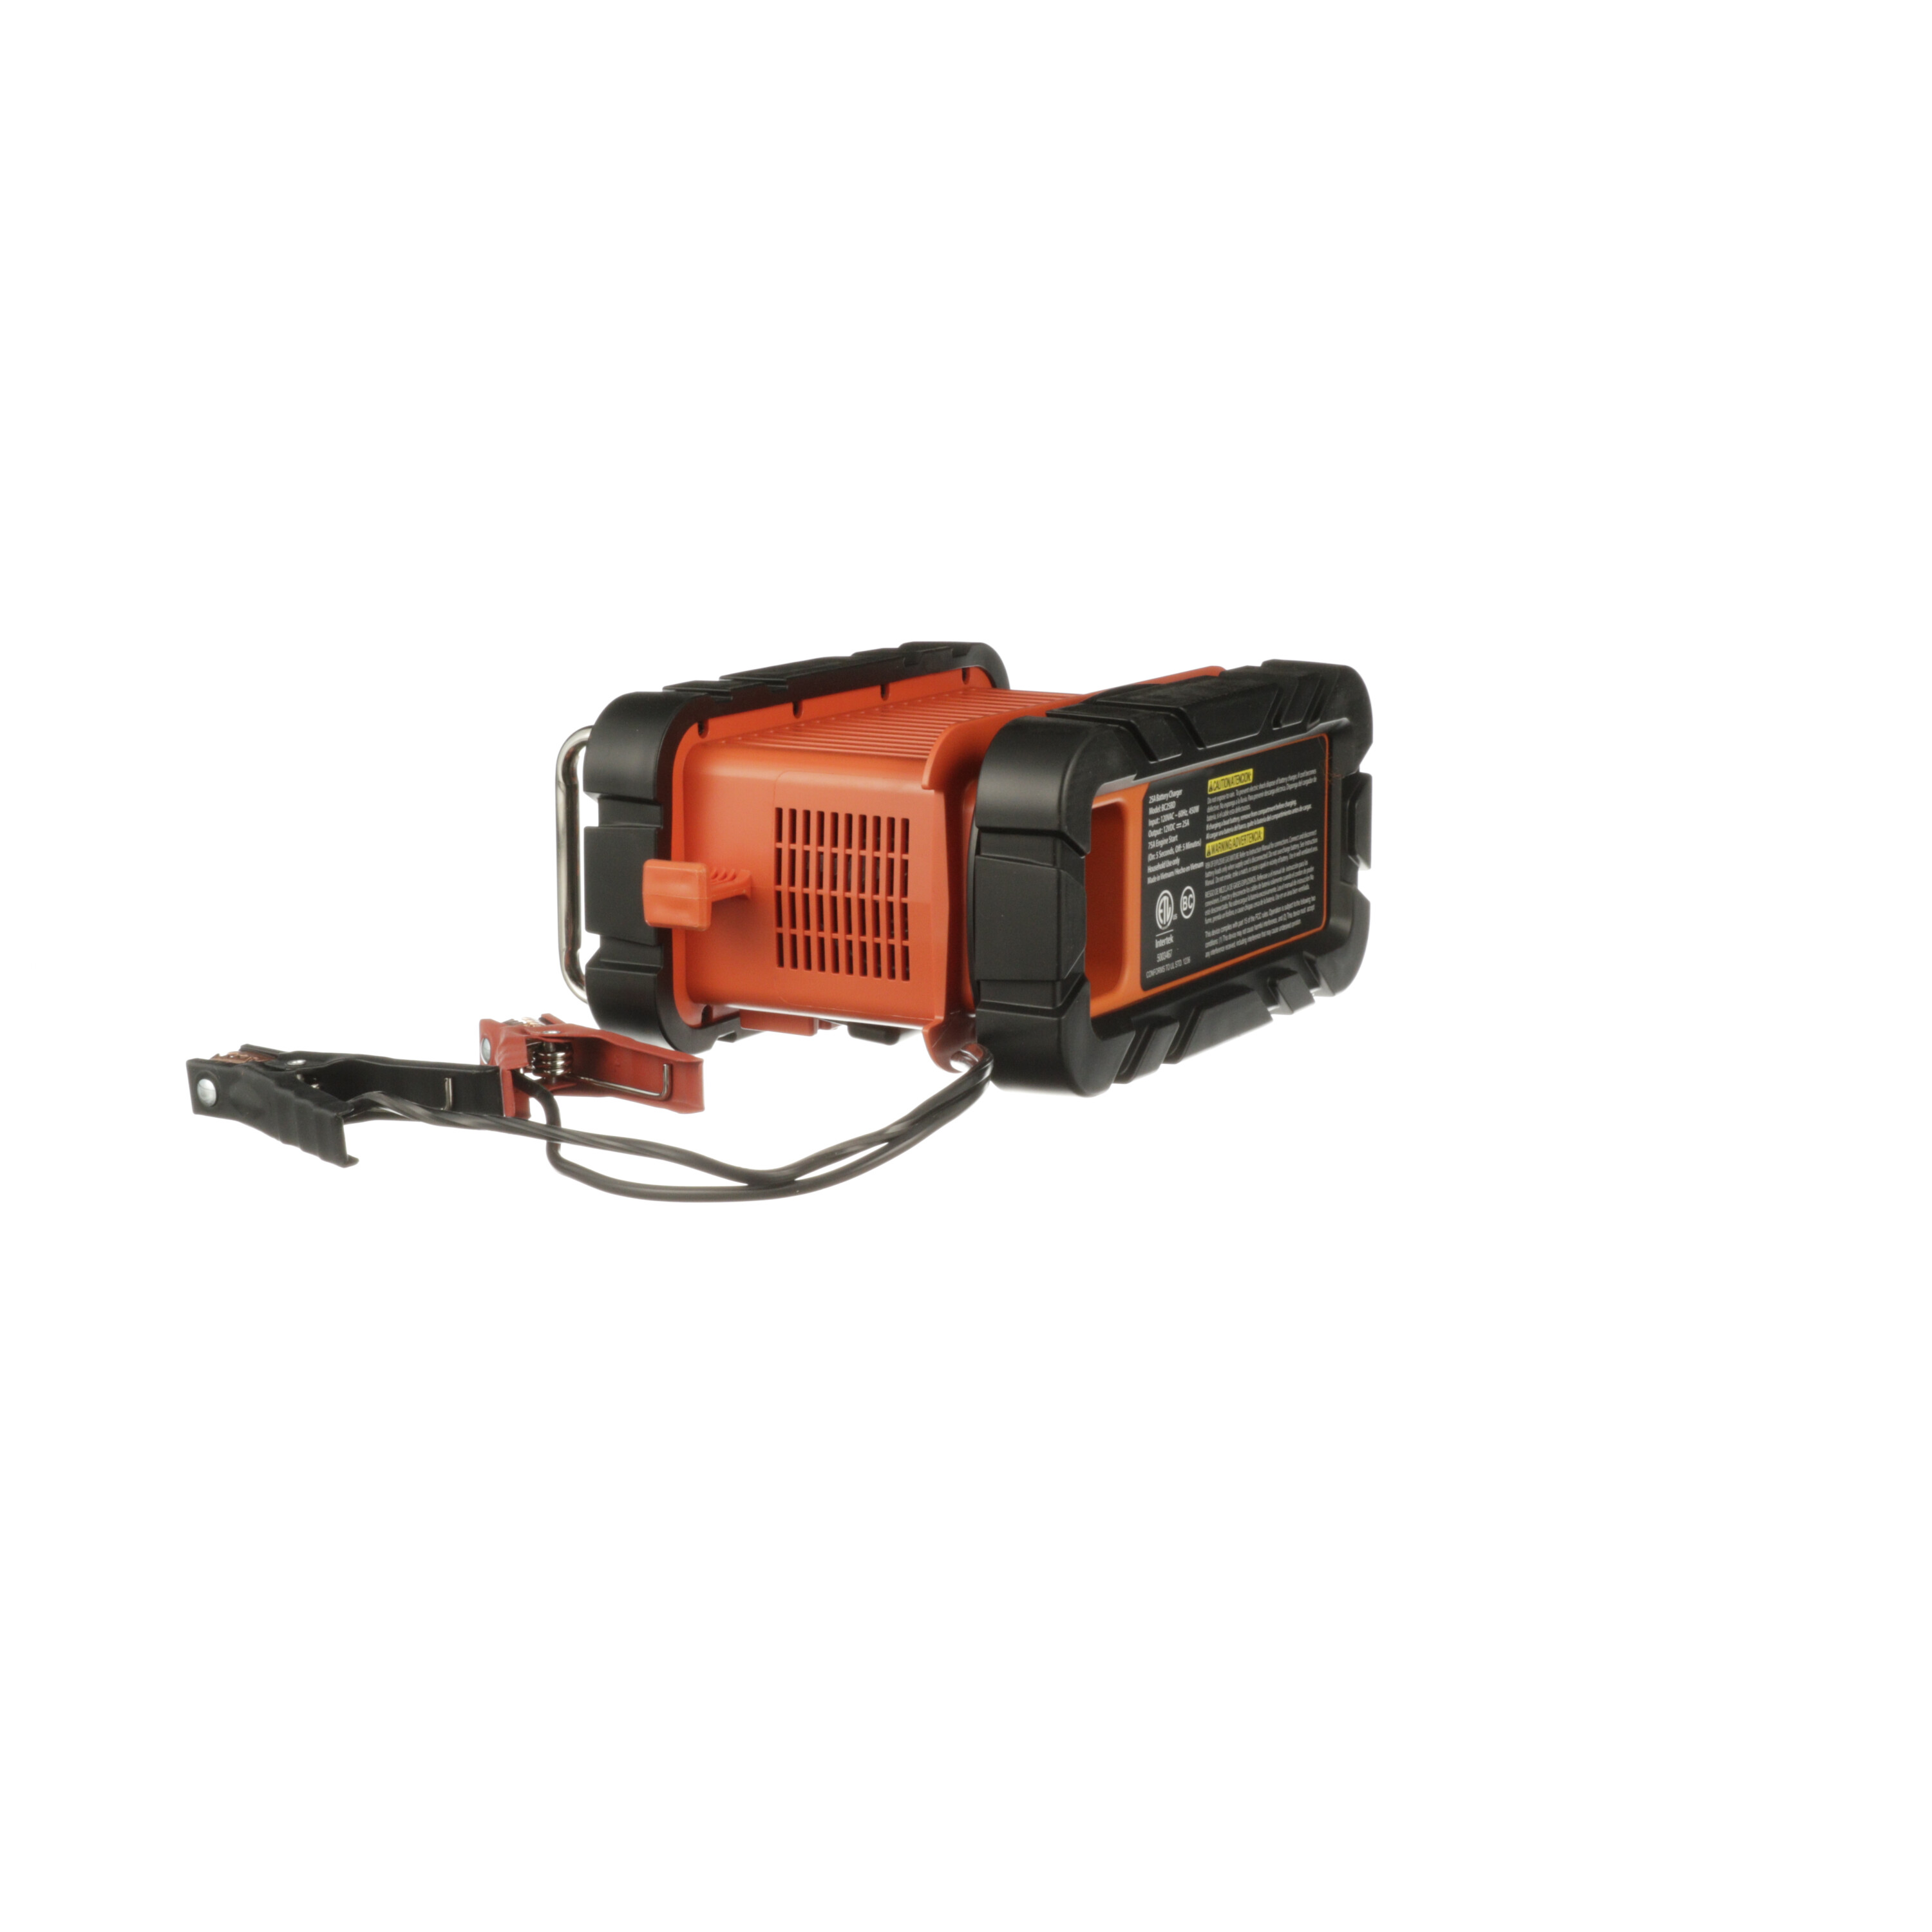 BLACK DECKER 750 Amp Portable Power Station JS75C2PB for Sale in Temple  City, CA - OfferUp